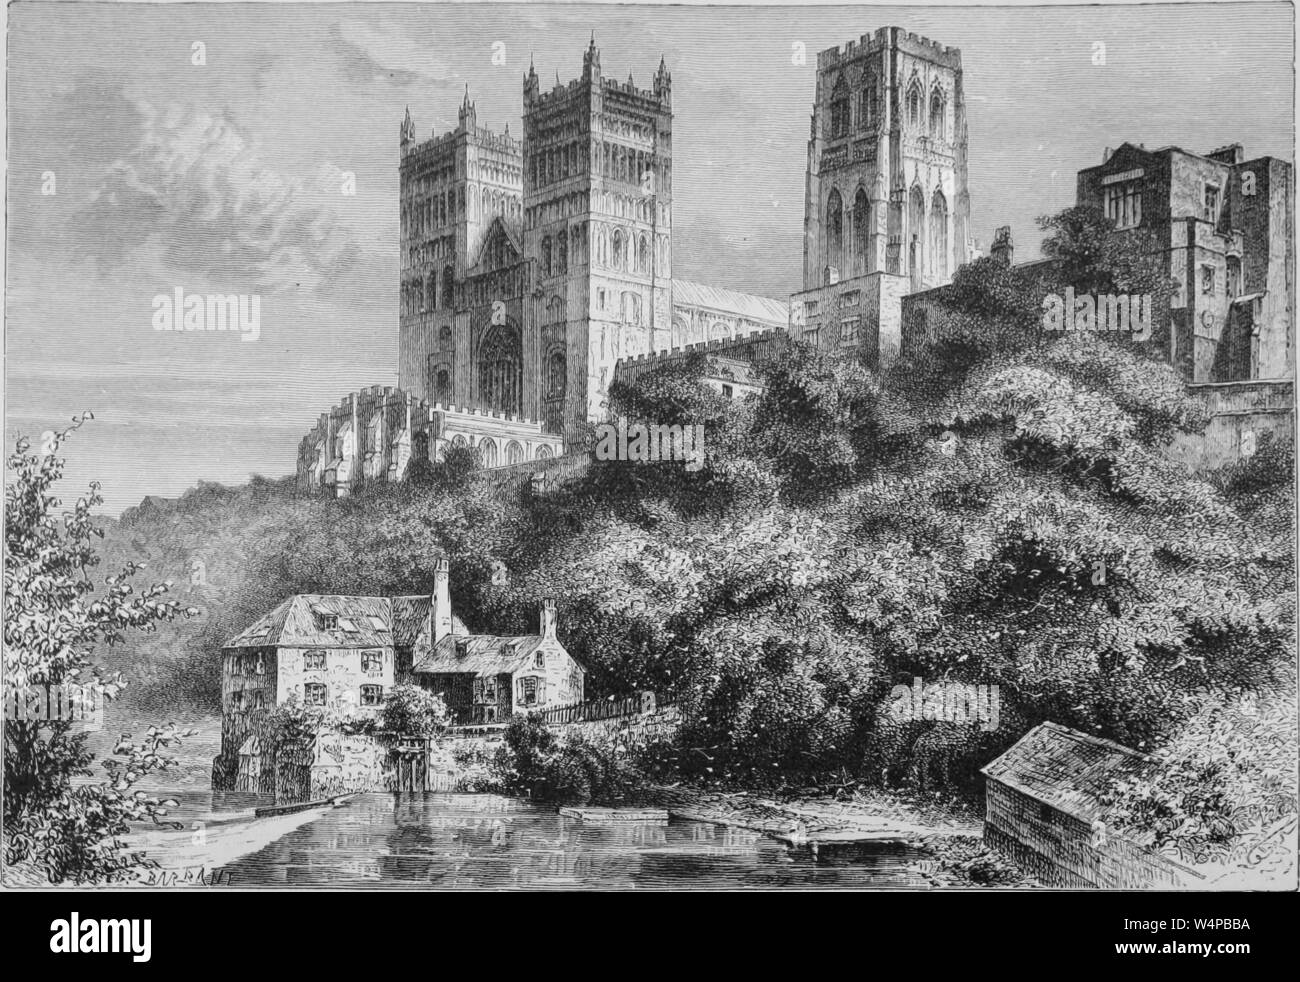 Engraving of the Durham Cathedral in County Durham, England, from the book 'The earth and its inhabitants' by Elisee Reclus, 1881. Courtesy Internet Archive. () Stock Photo